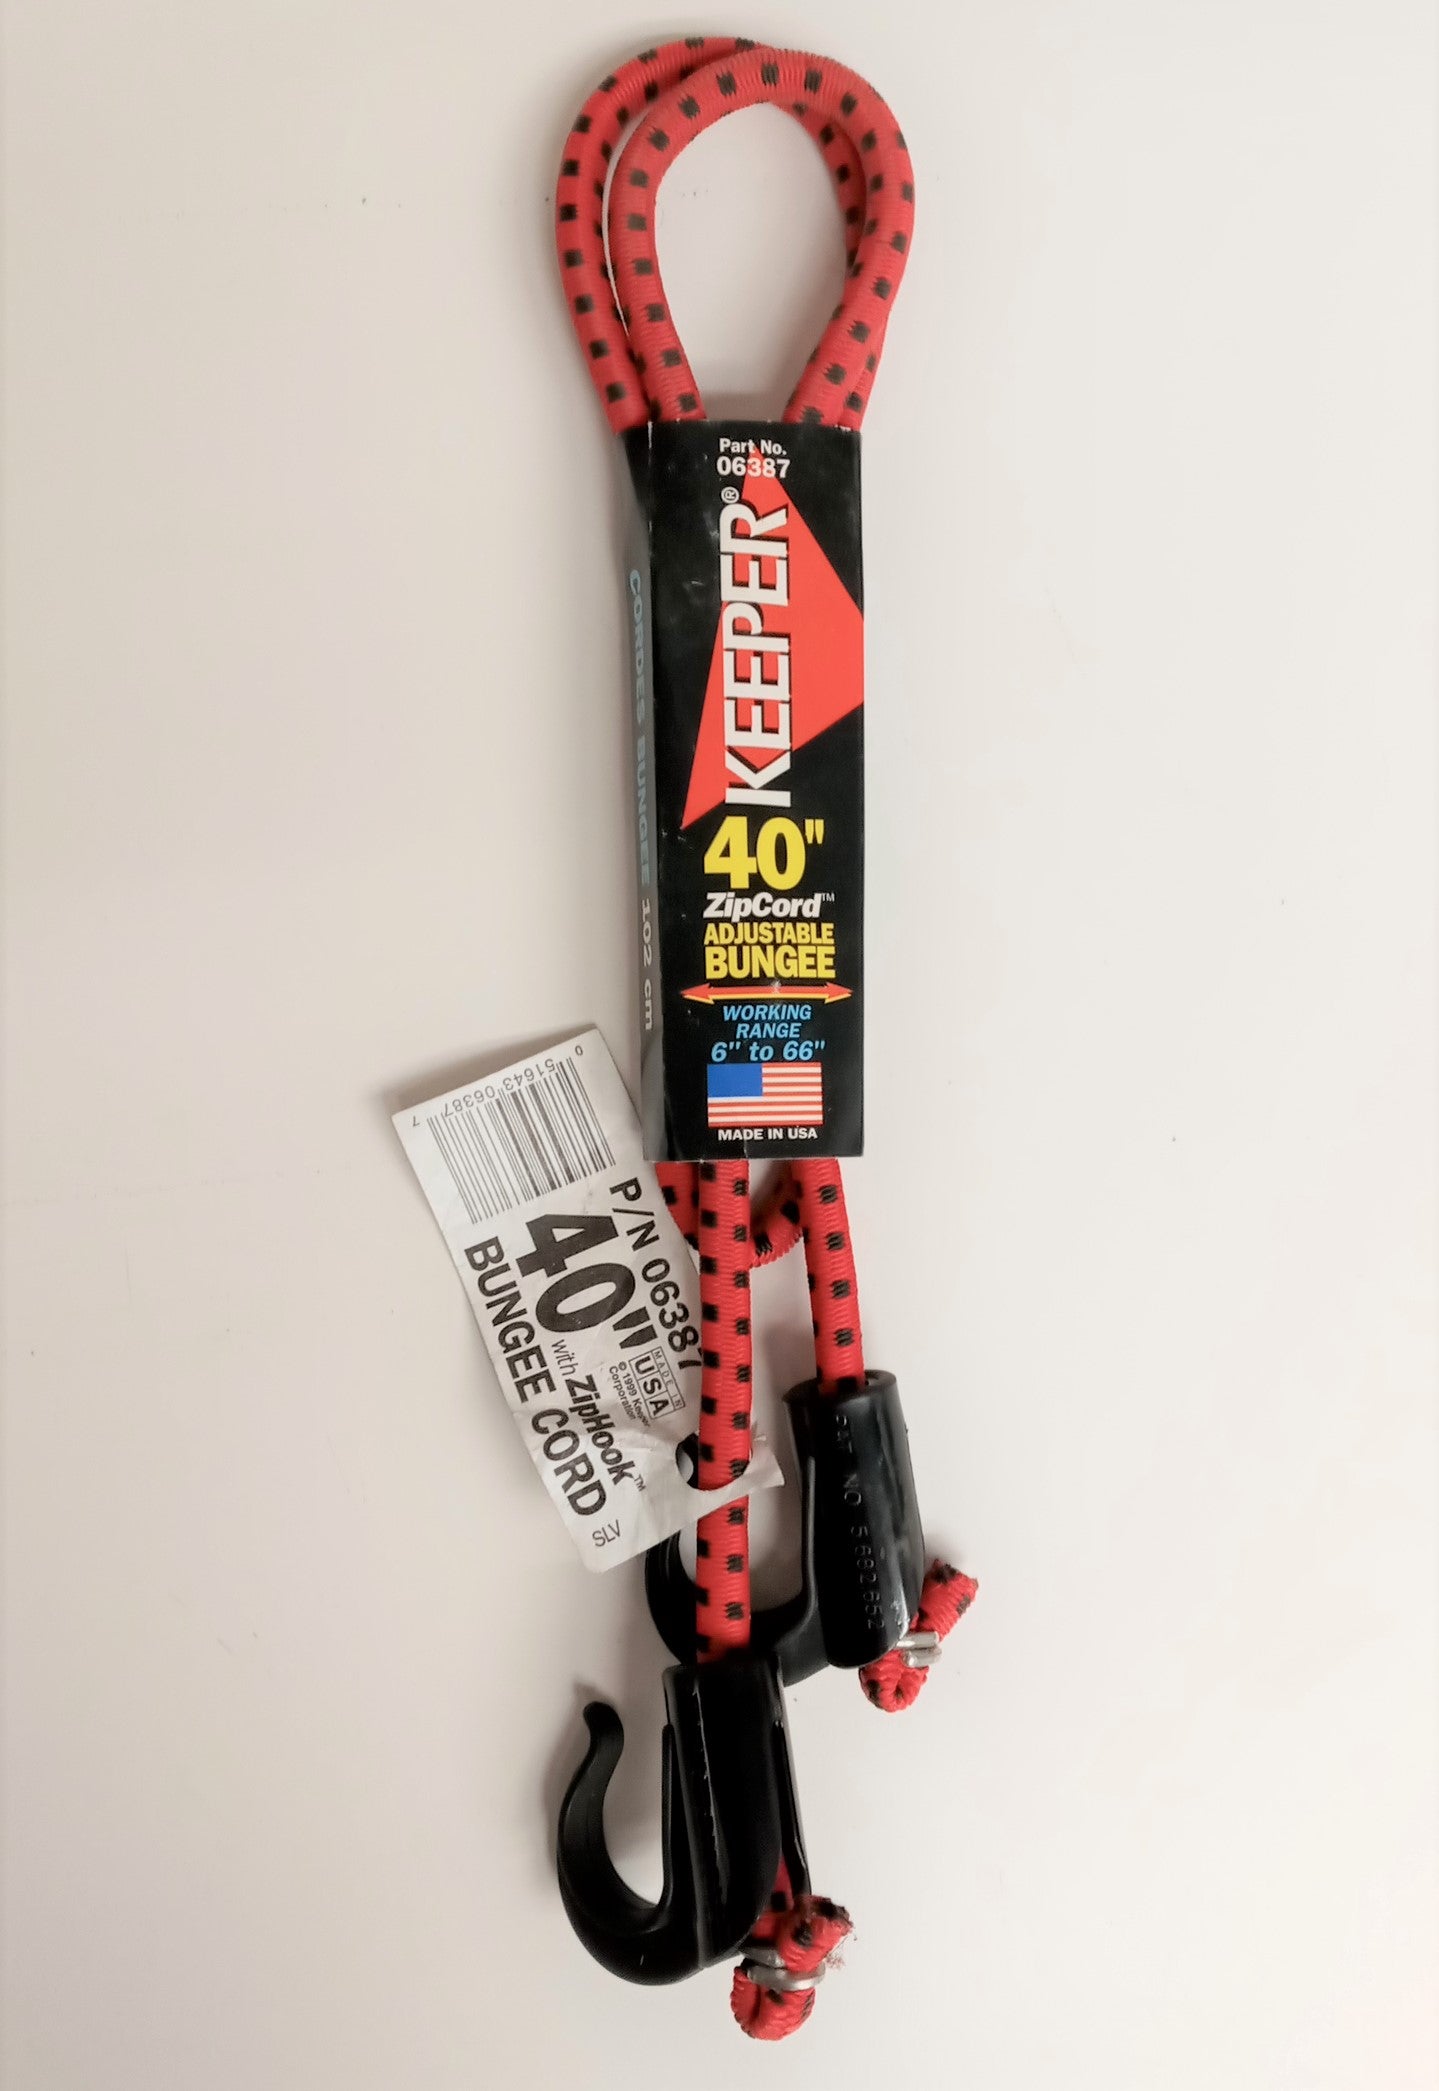 Keeper 06387 ZipCord 40" Adjustable Bungee (Assorted Colors) USA